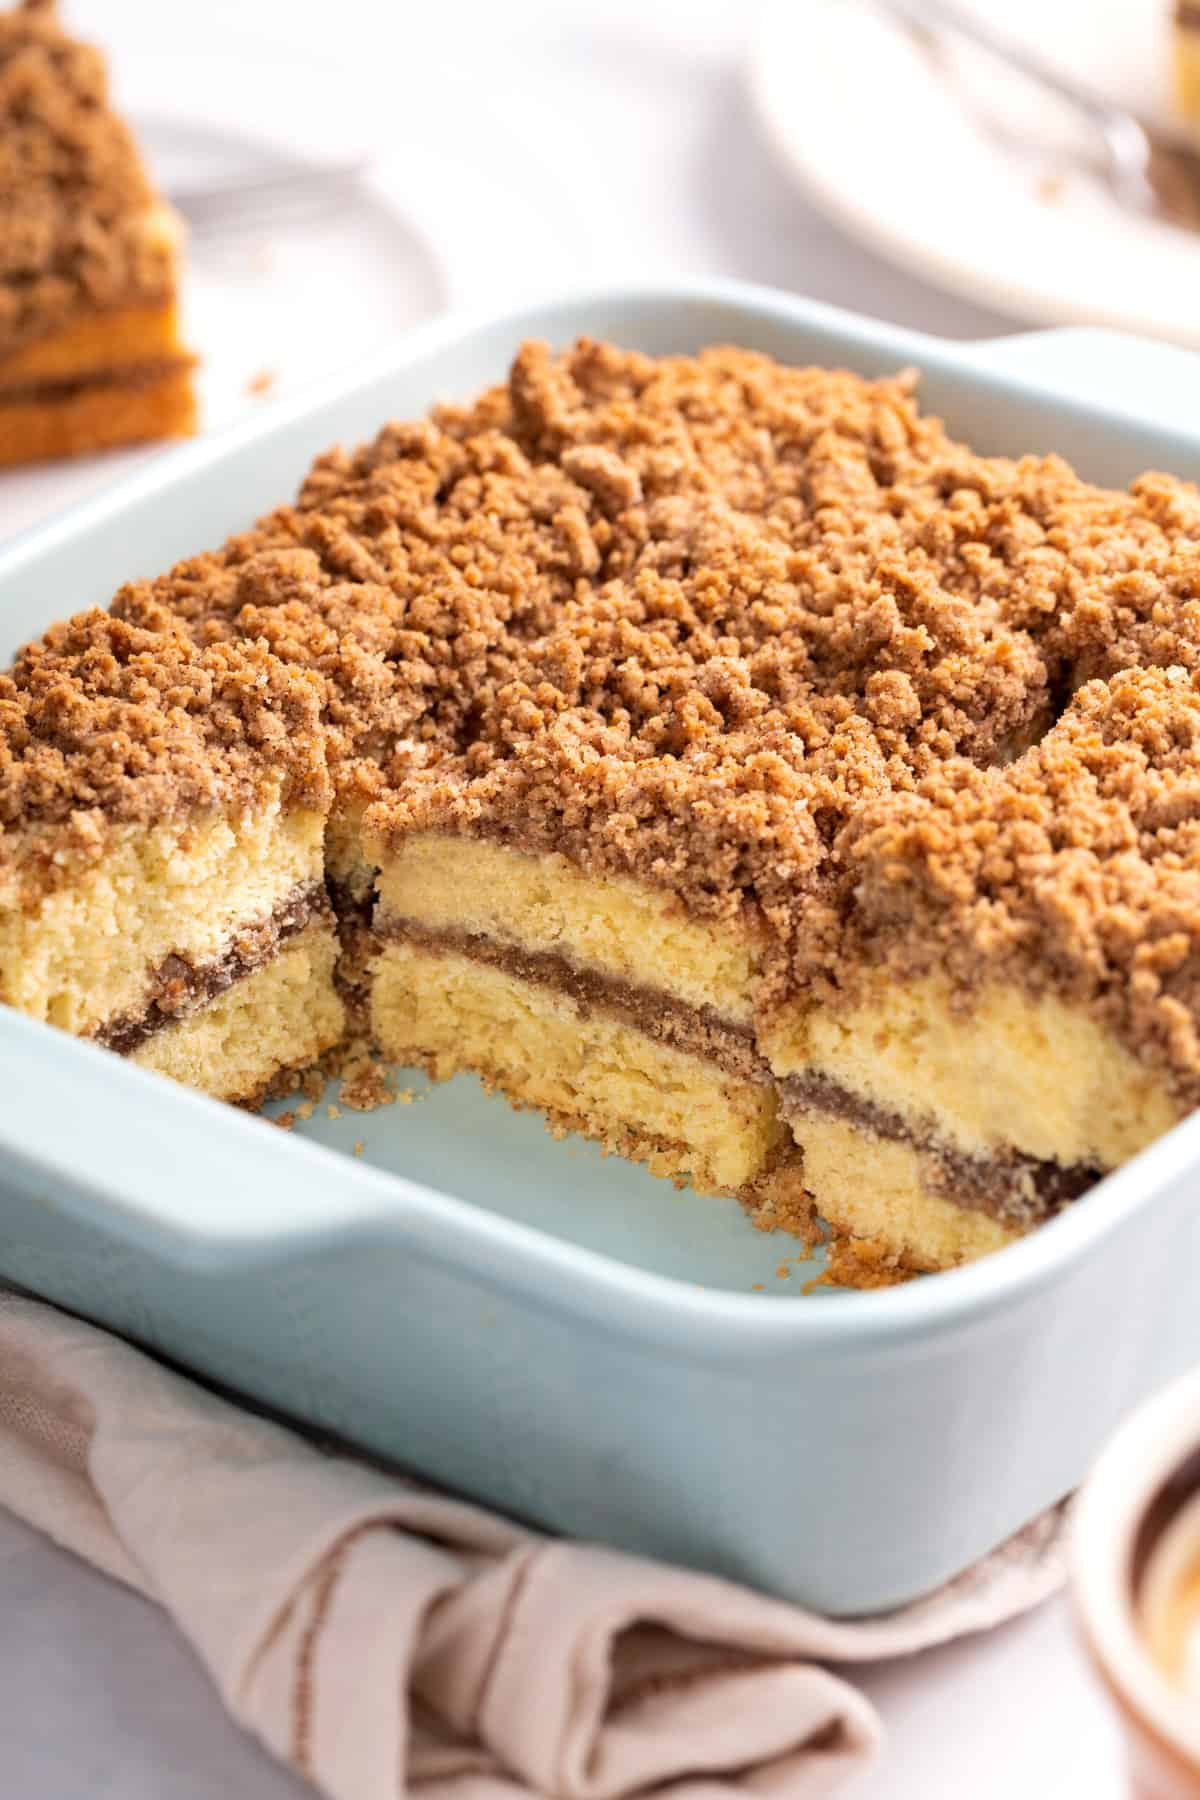 sliced coffee cake served in a blue 9x9 inch baking dish to show the cross section